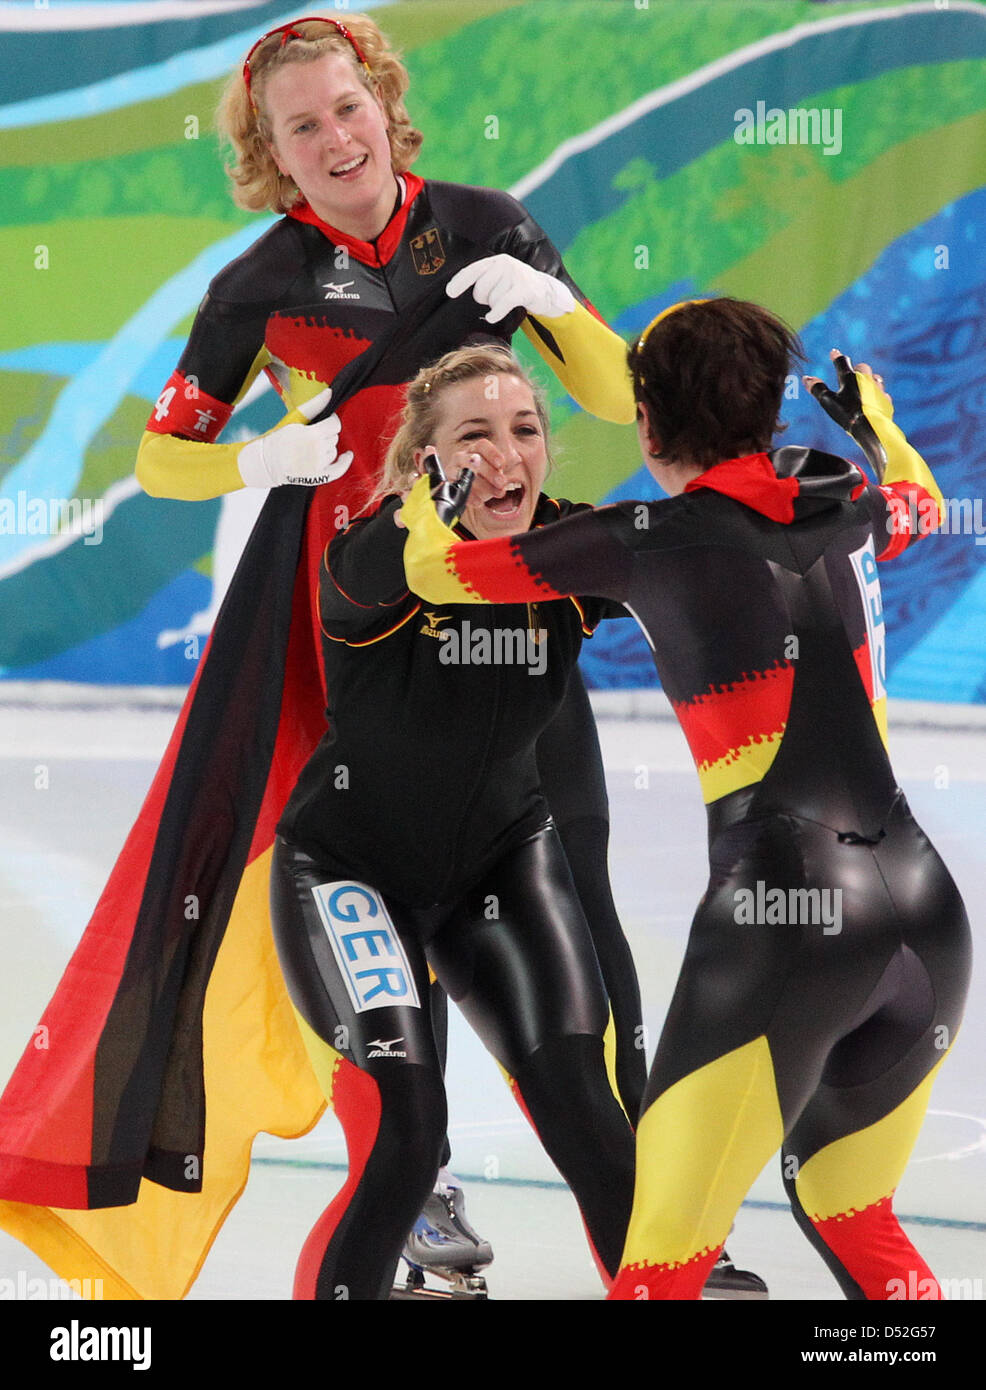 (L-R) Katrin Mattscherodt, Anni Friesinger-Postma and Daniela Anschuetz-Thoms of Germany enjoy their first place after the Speed Skating women's team pursuit final at the Richmond Olympic Oval during the Vancouver 2010 Olympic Games, in Vancouver, Canada, 27 February 2010. Photo: Daniel Karmann  +++(c) dpa - Bildfunk+++ Stock Photo